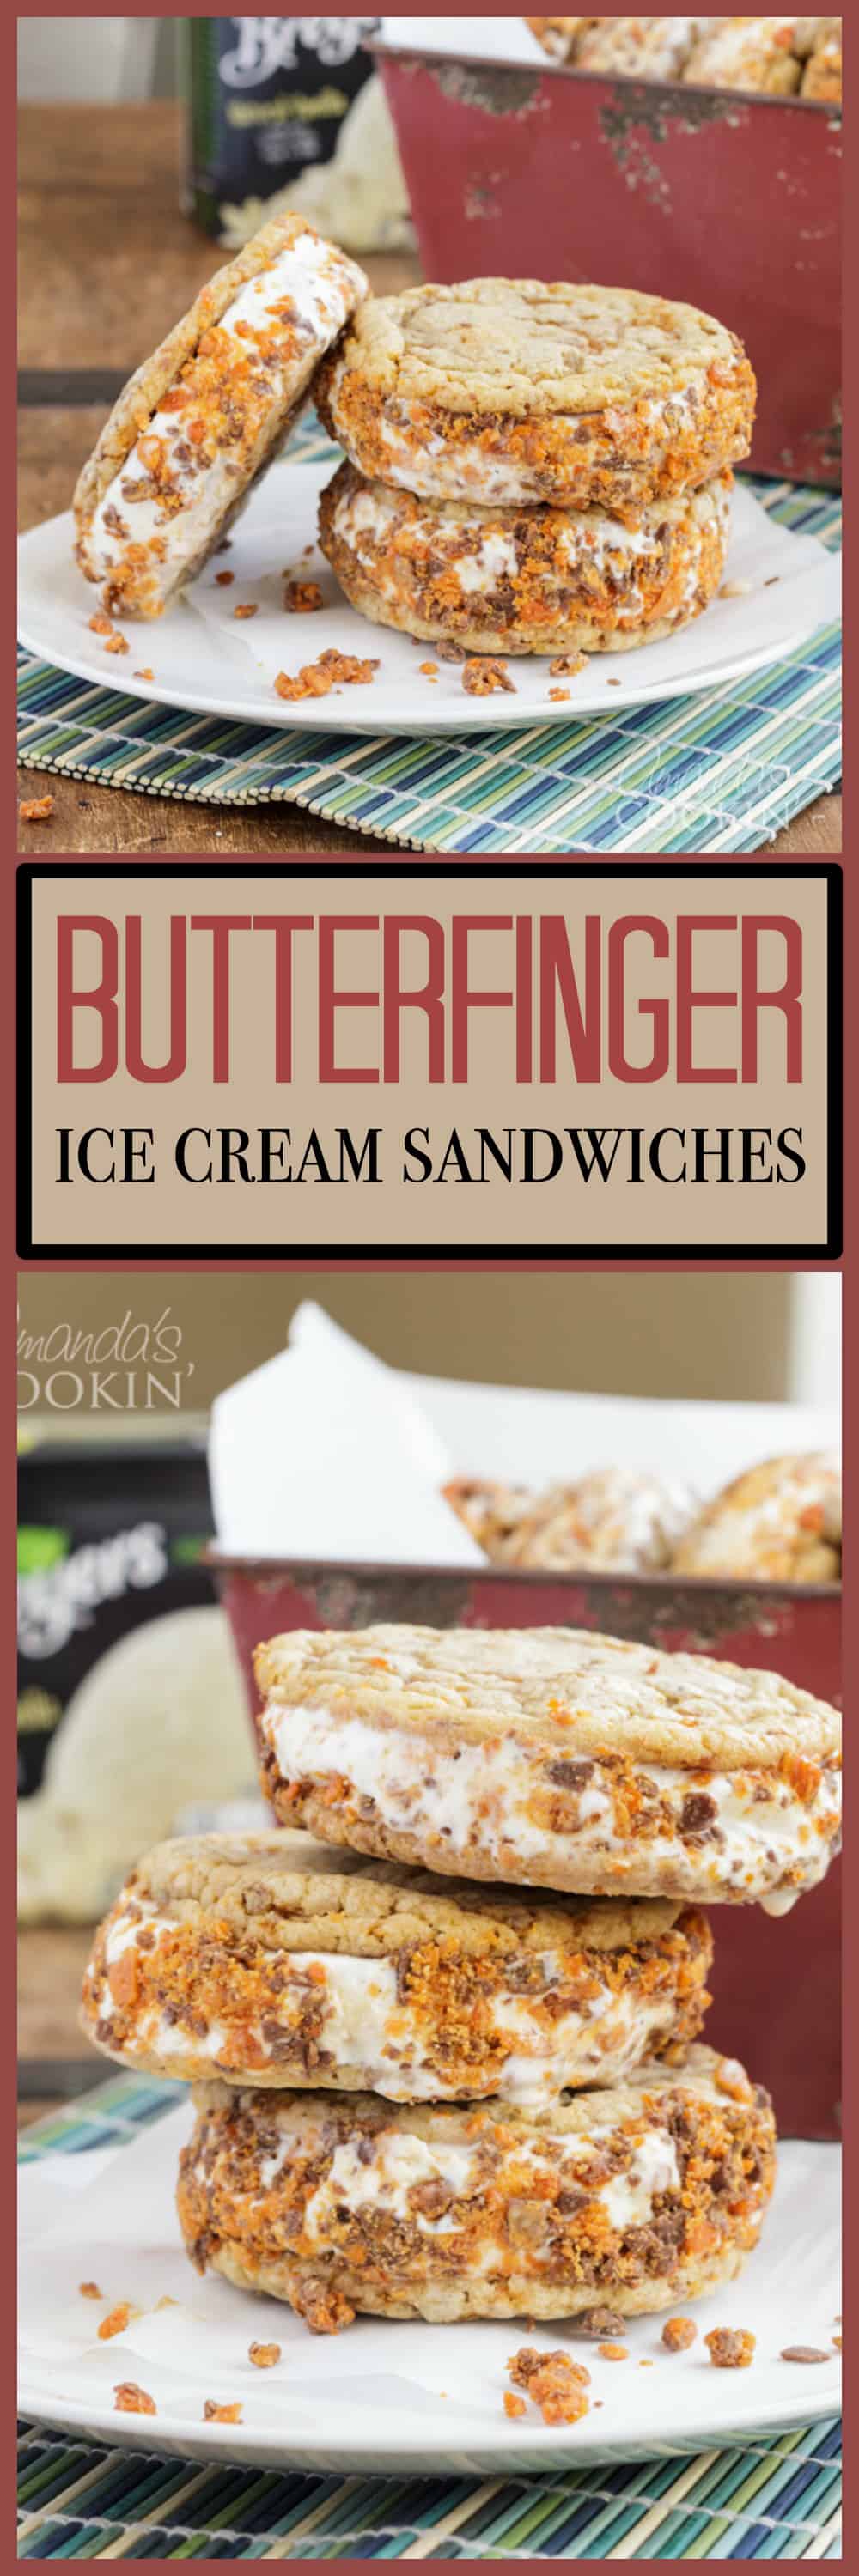 pinterest image with text butterfinger ice cream sandwiches